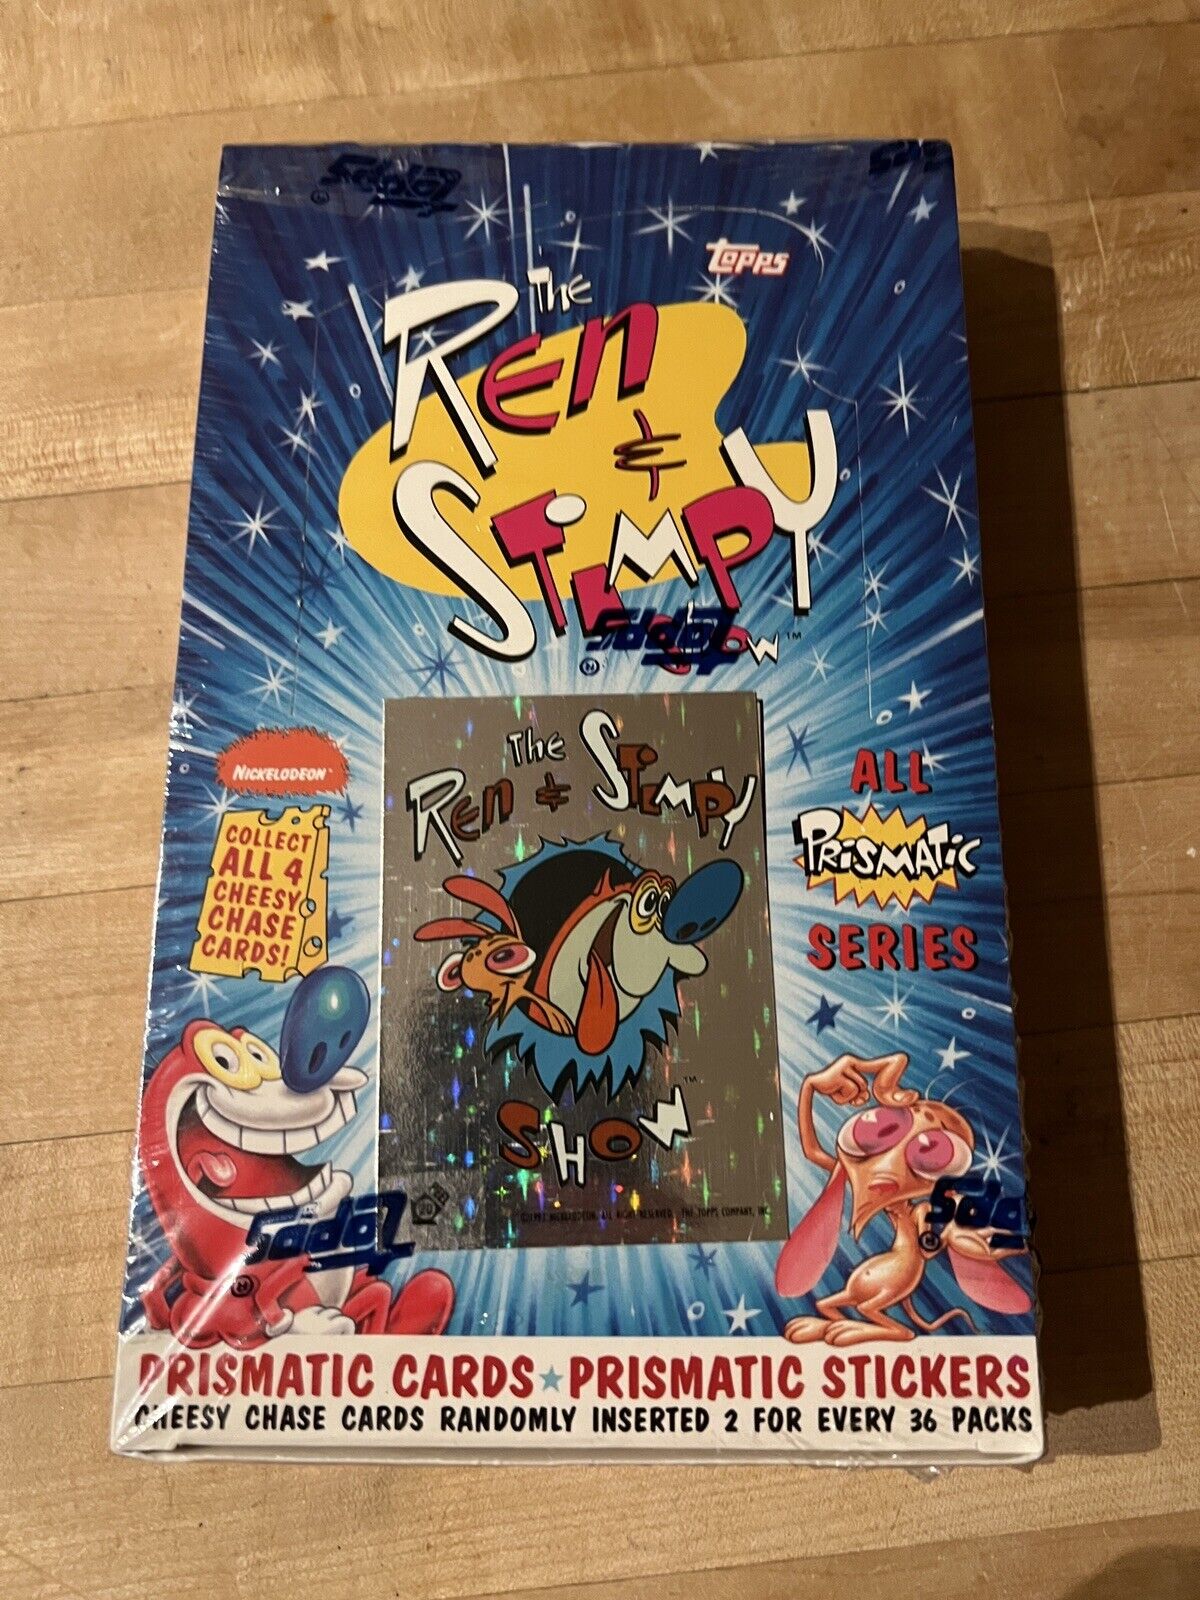 1993 TOPPS Ren & Stimpy Show Unopened Box factory sealed Prismatic